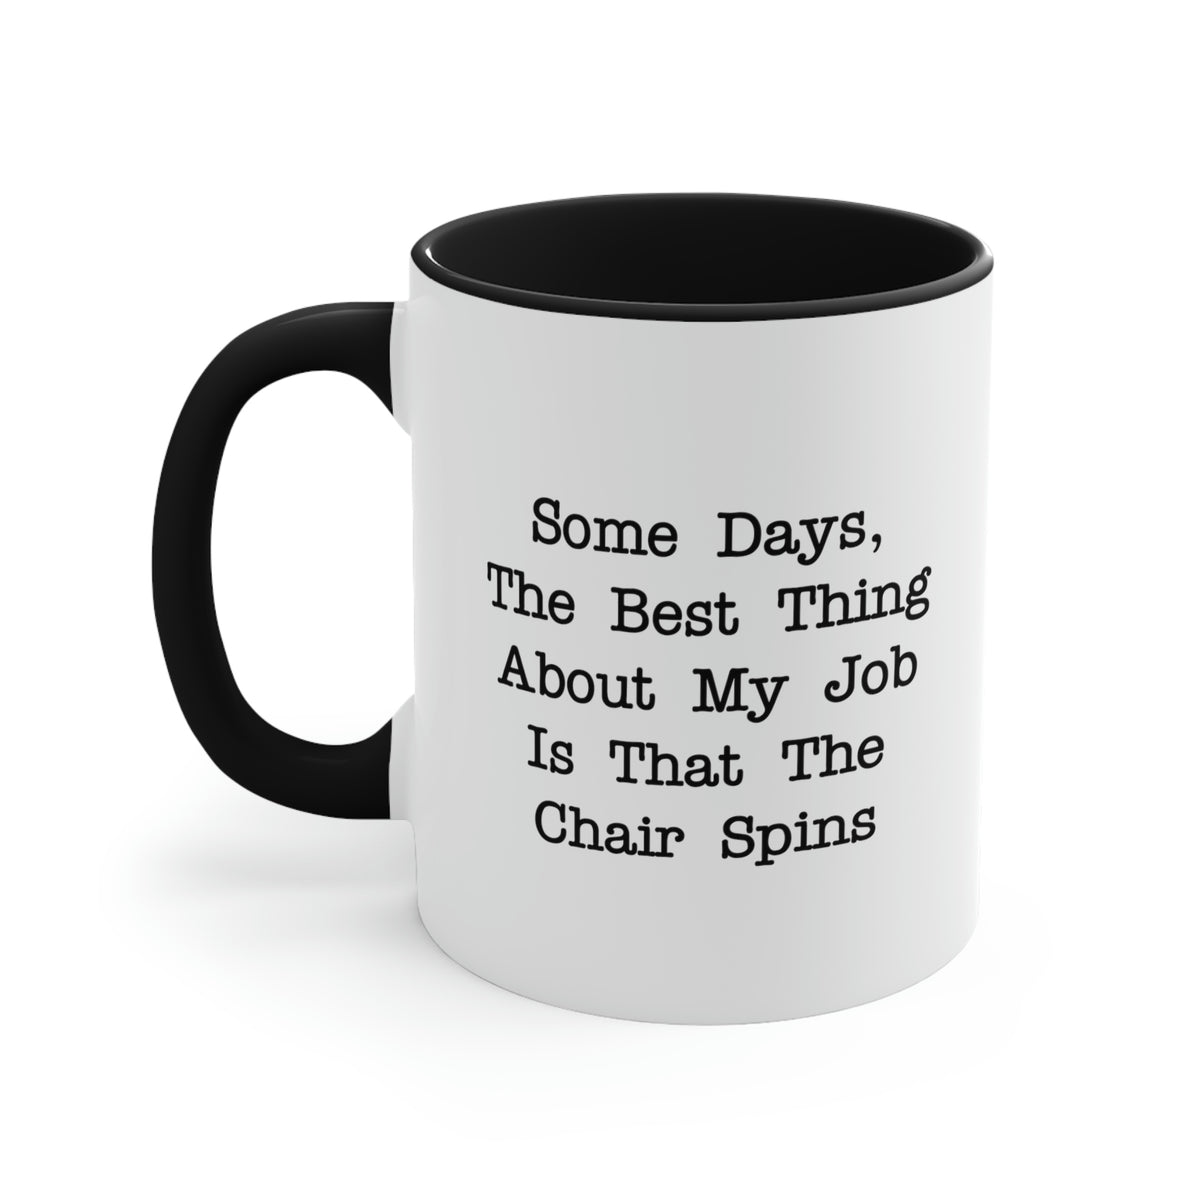 Administrative Assistant Gifts - The Best Thing About My Job Is That The Chair Spins - Admin Assistant Two Tone Mug For Women Men